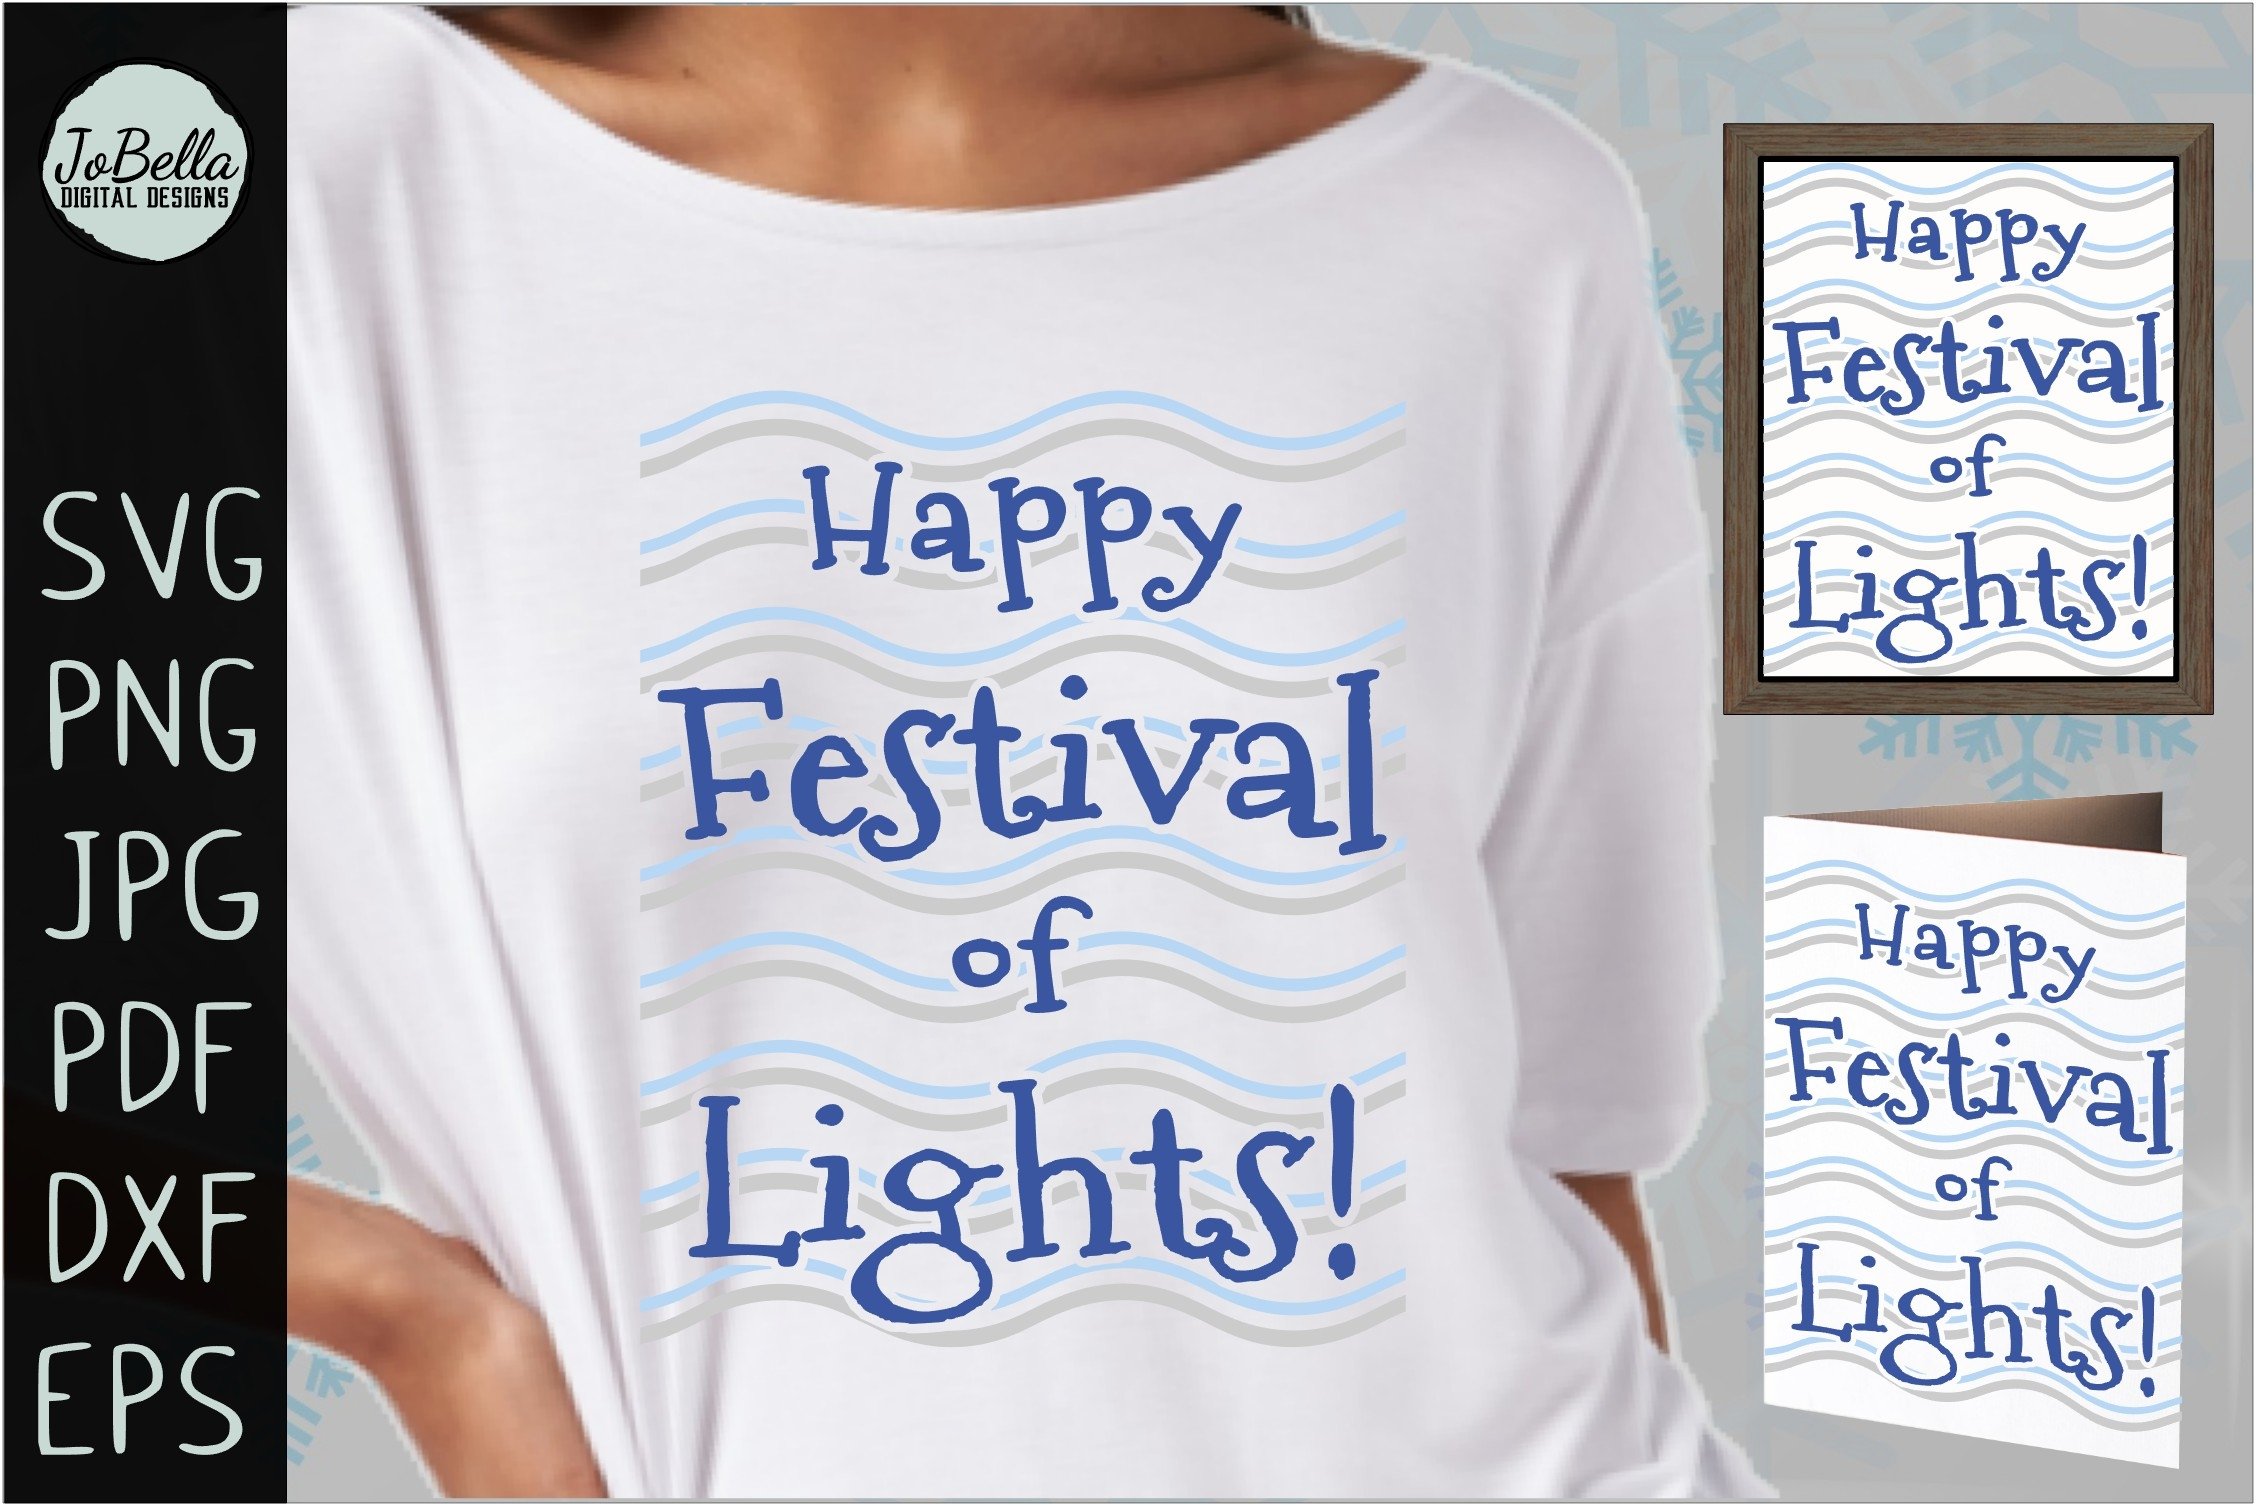 White t-shirt with the lettering "Happy festival of lights".